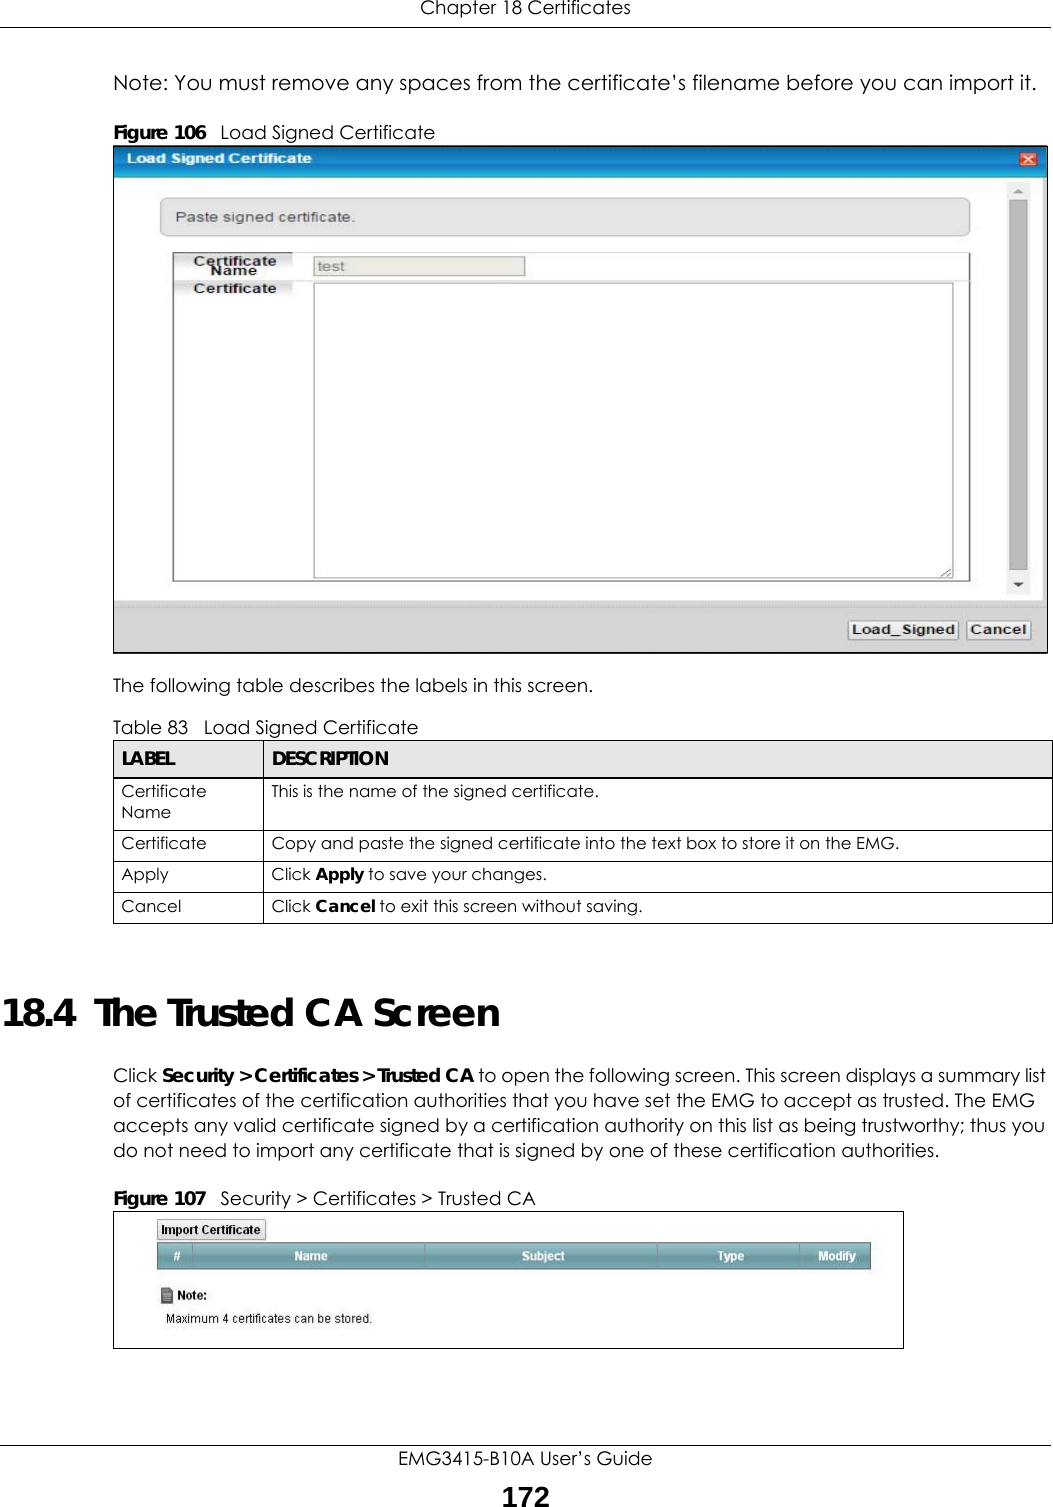 Chapter 18 CertificatesEMG3415-B10A User’s Guide172Note: You must remove any spaces from the certificate’s filename before you can import it.Figure 106   Load Signed Certificate The following table describes the labels in this screen. 18.4  The Trusted CA ScreenClick Security &gt; Certificates &gt; Trusted CA to open the following screen. This screen displays a summary list of certificates of the certification authorities that you have set the EMG to accept as trusted. The EMG accepts any valid certificate signed by a certification authority on this list as being trustworthy; thus you do not need to import any certificate that is signed by one of these certification authorities. Figure 107   Security &gt; Certificates &gt; Trusted CA Table 83   Load Signed CertificateLABEL DESCRIPTIONCertificate NameThis is the name of the signed certificate. Certificate Copy and paste the signed certificate into the text box to store it on the EMG.Apply Click Apply to save your changes.Cancel Click Cancel to exit this screen without saving.